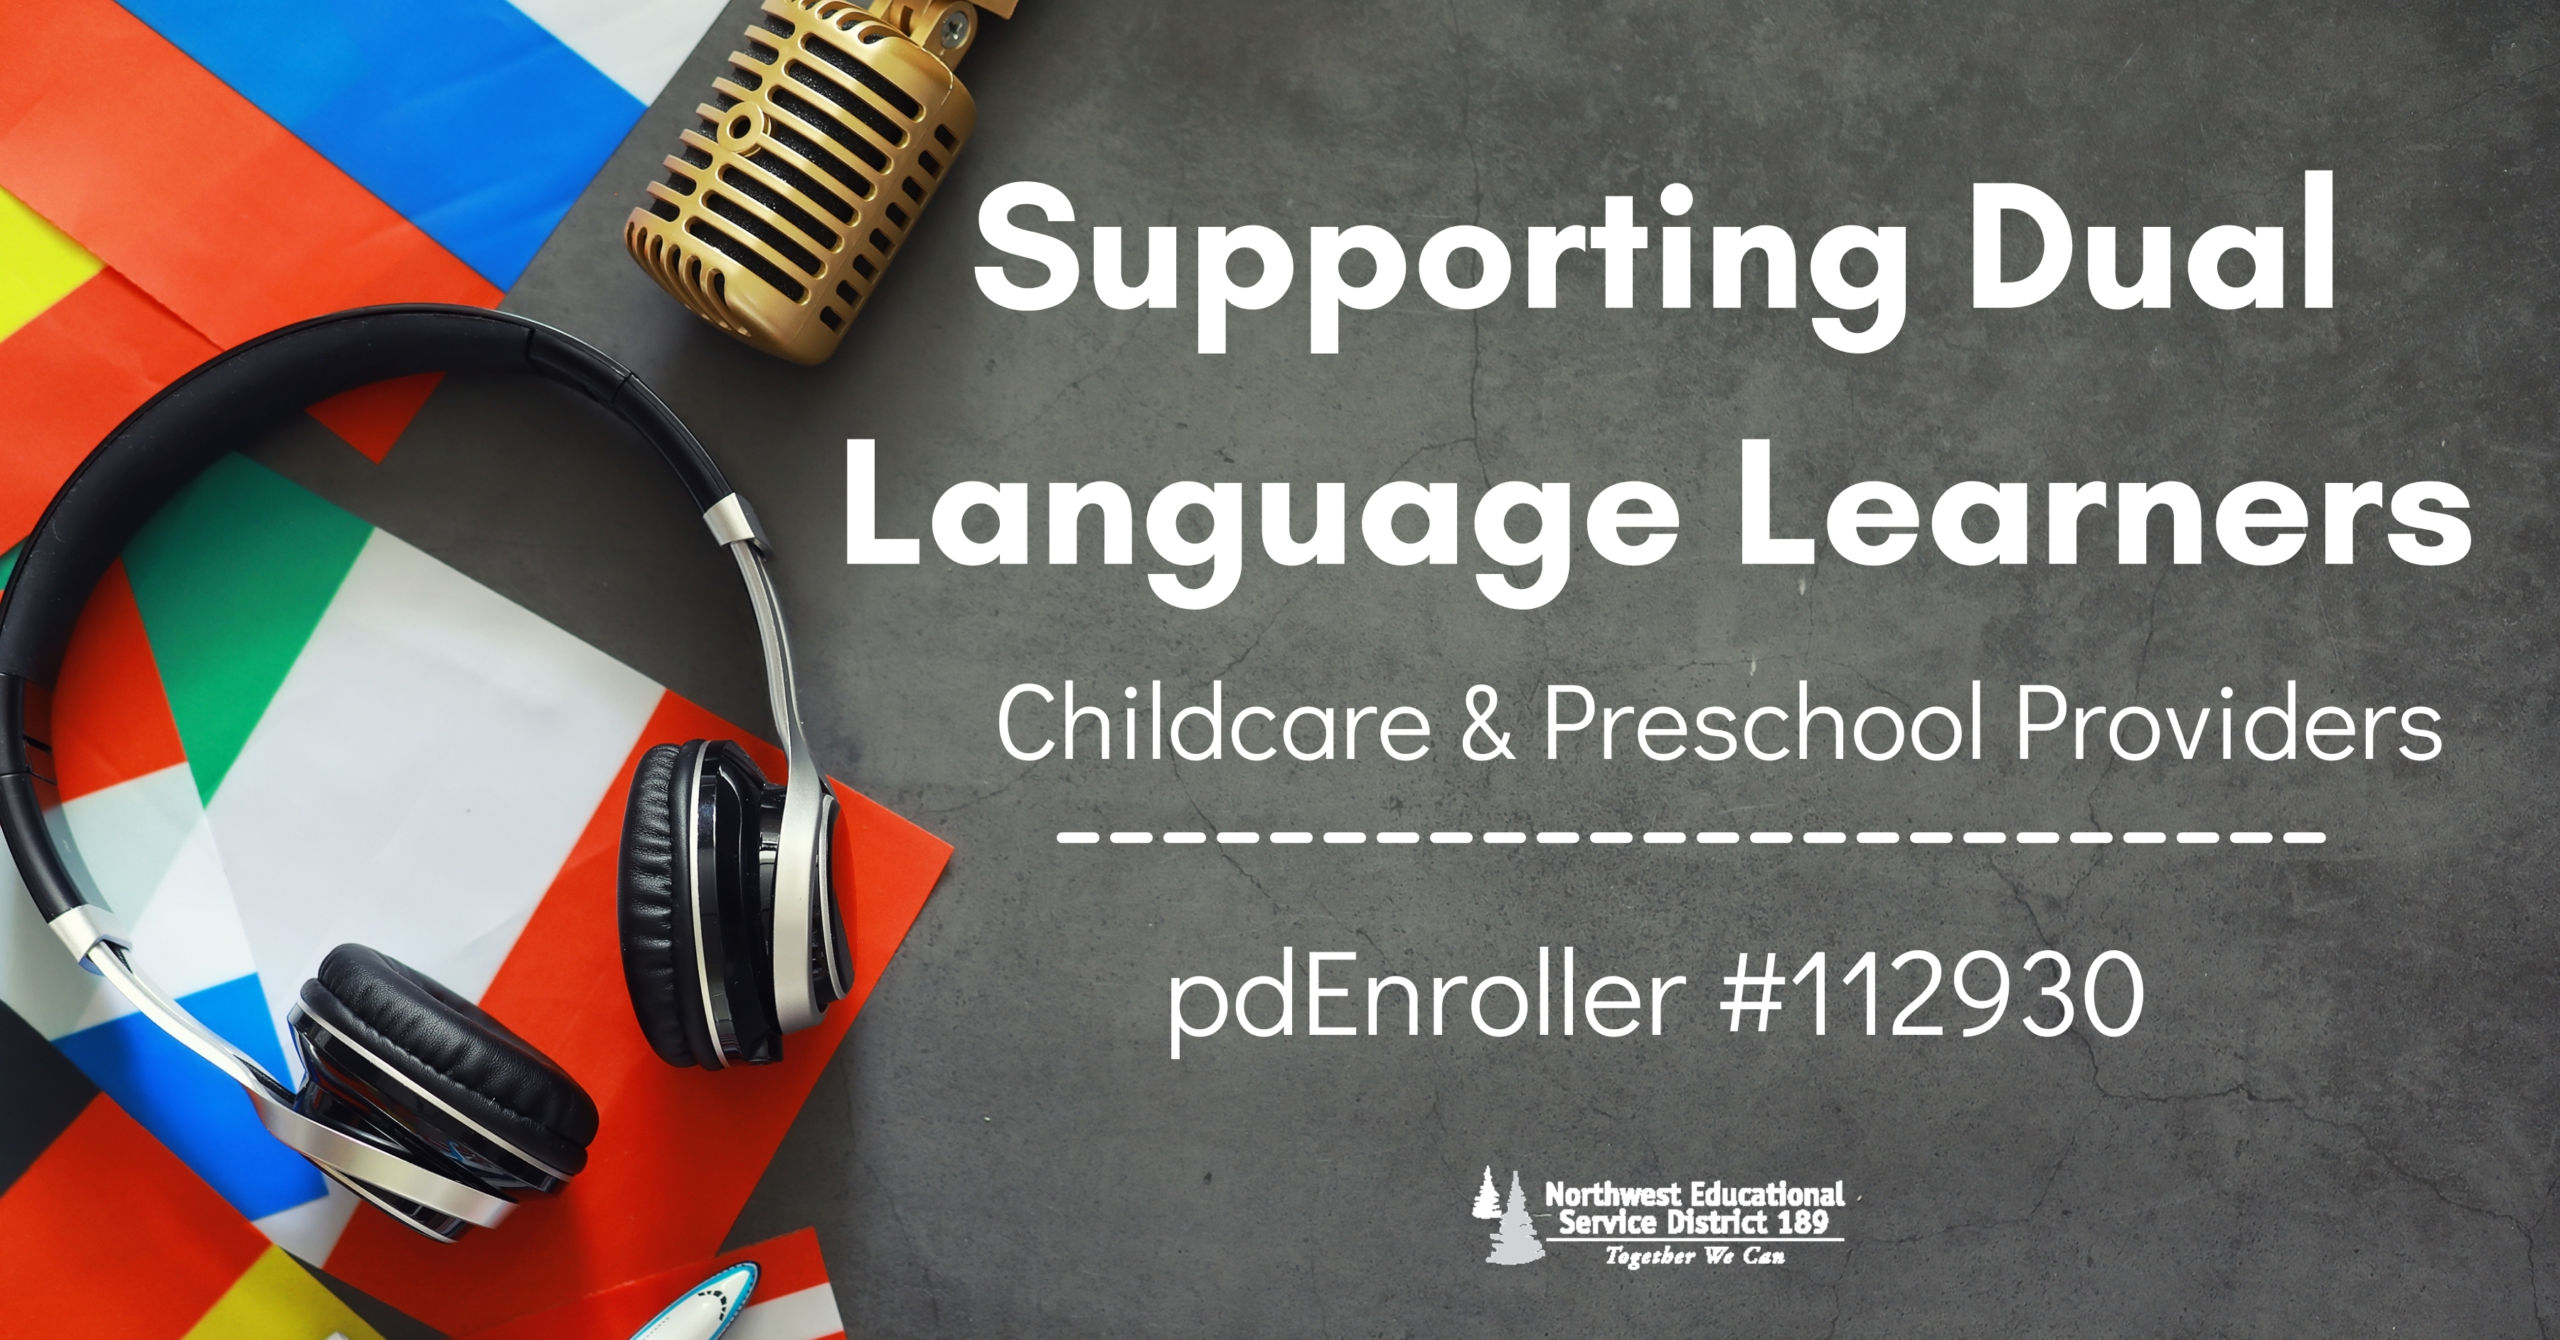 Supporting Dual Language Learners